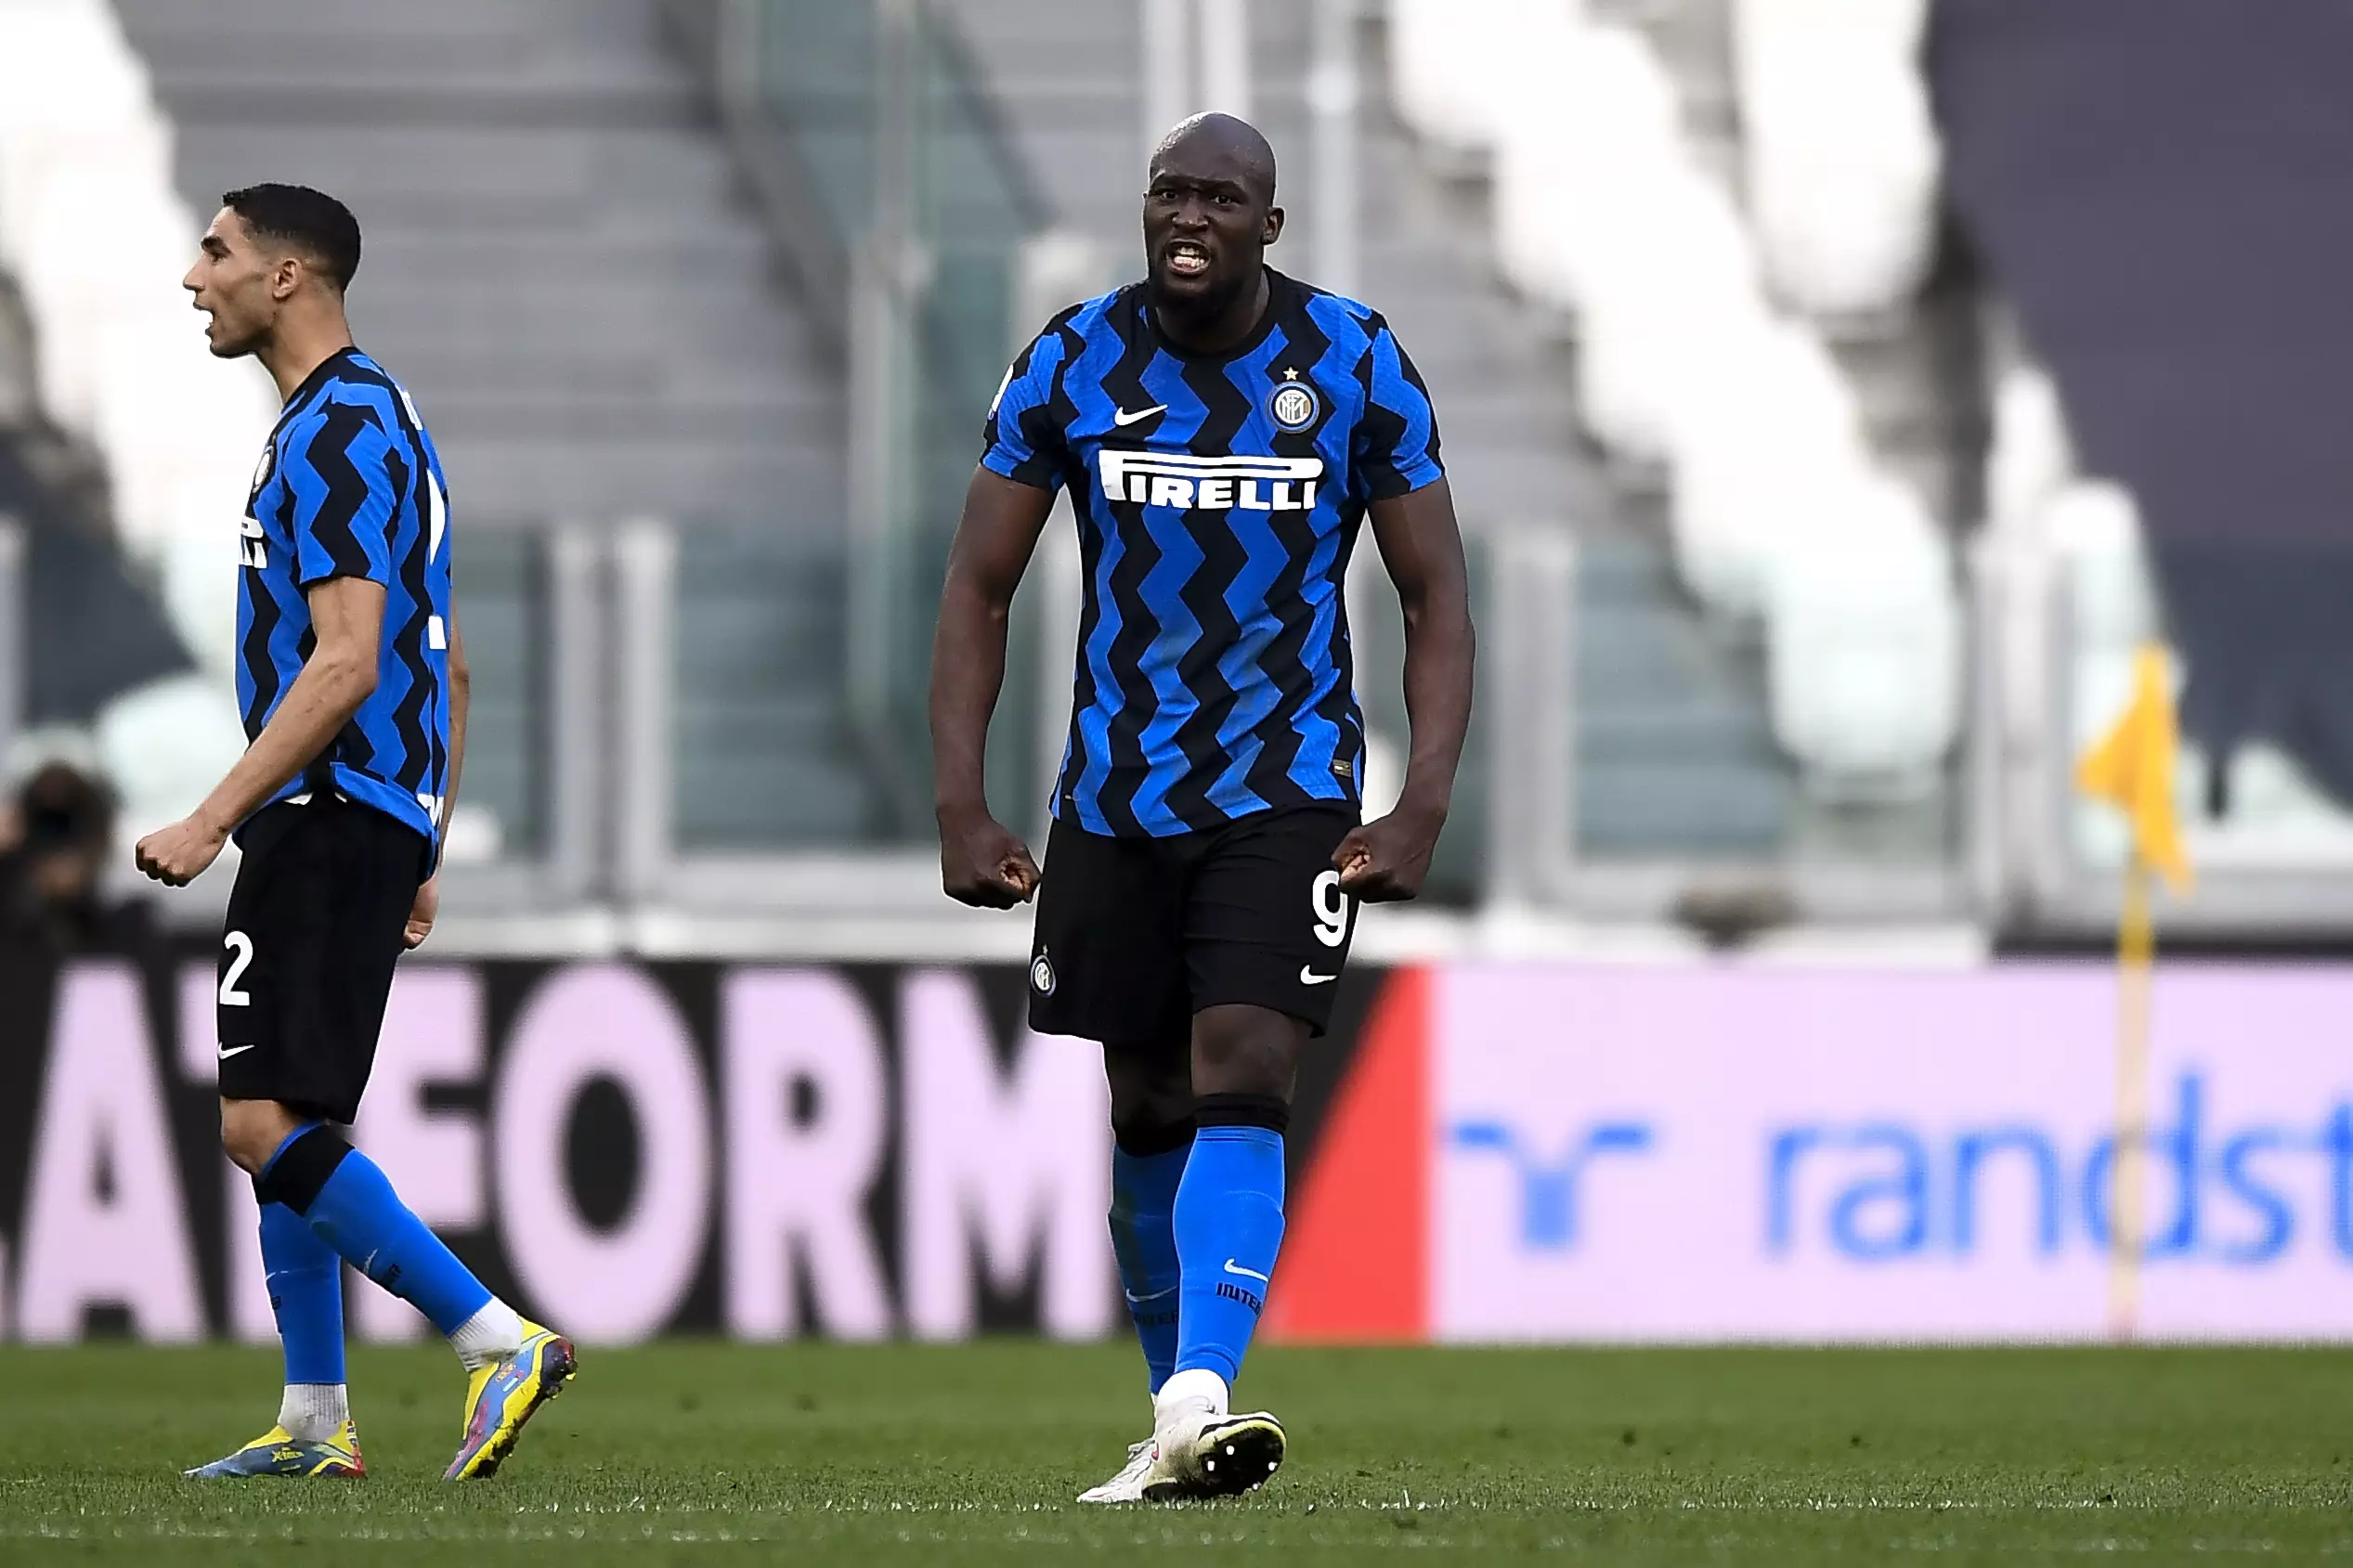 Lukaku helped Inter win the league for the first time in 11 years last season. Image: PA Images